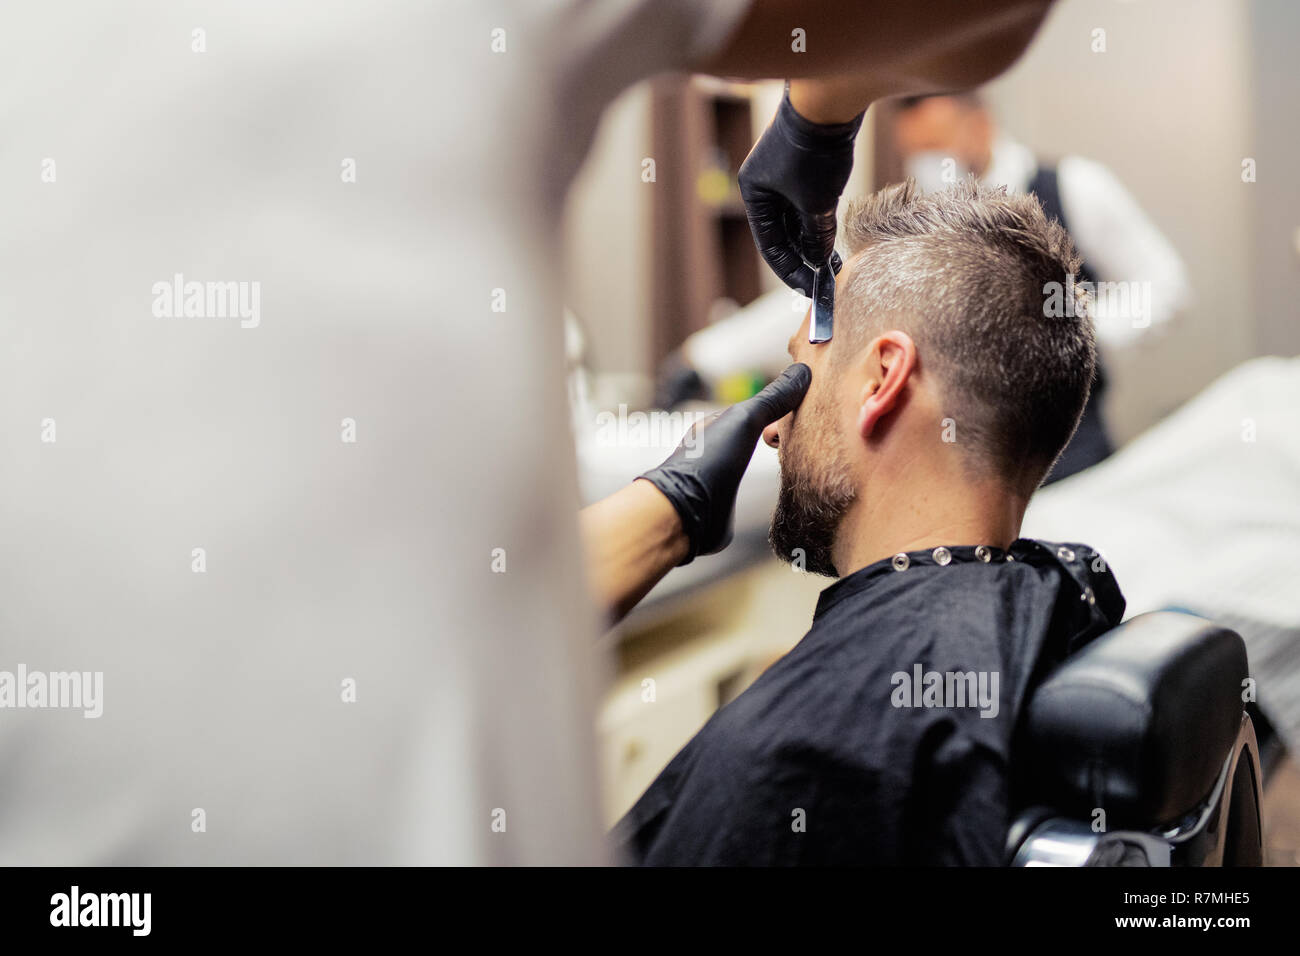 A man client visiting haidresser and hairstylist in barber shop. Stock Photo